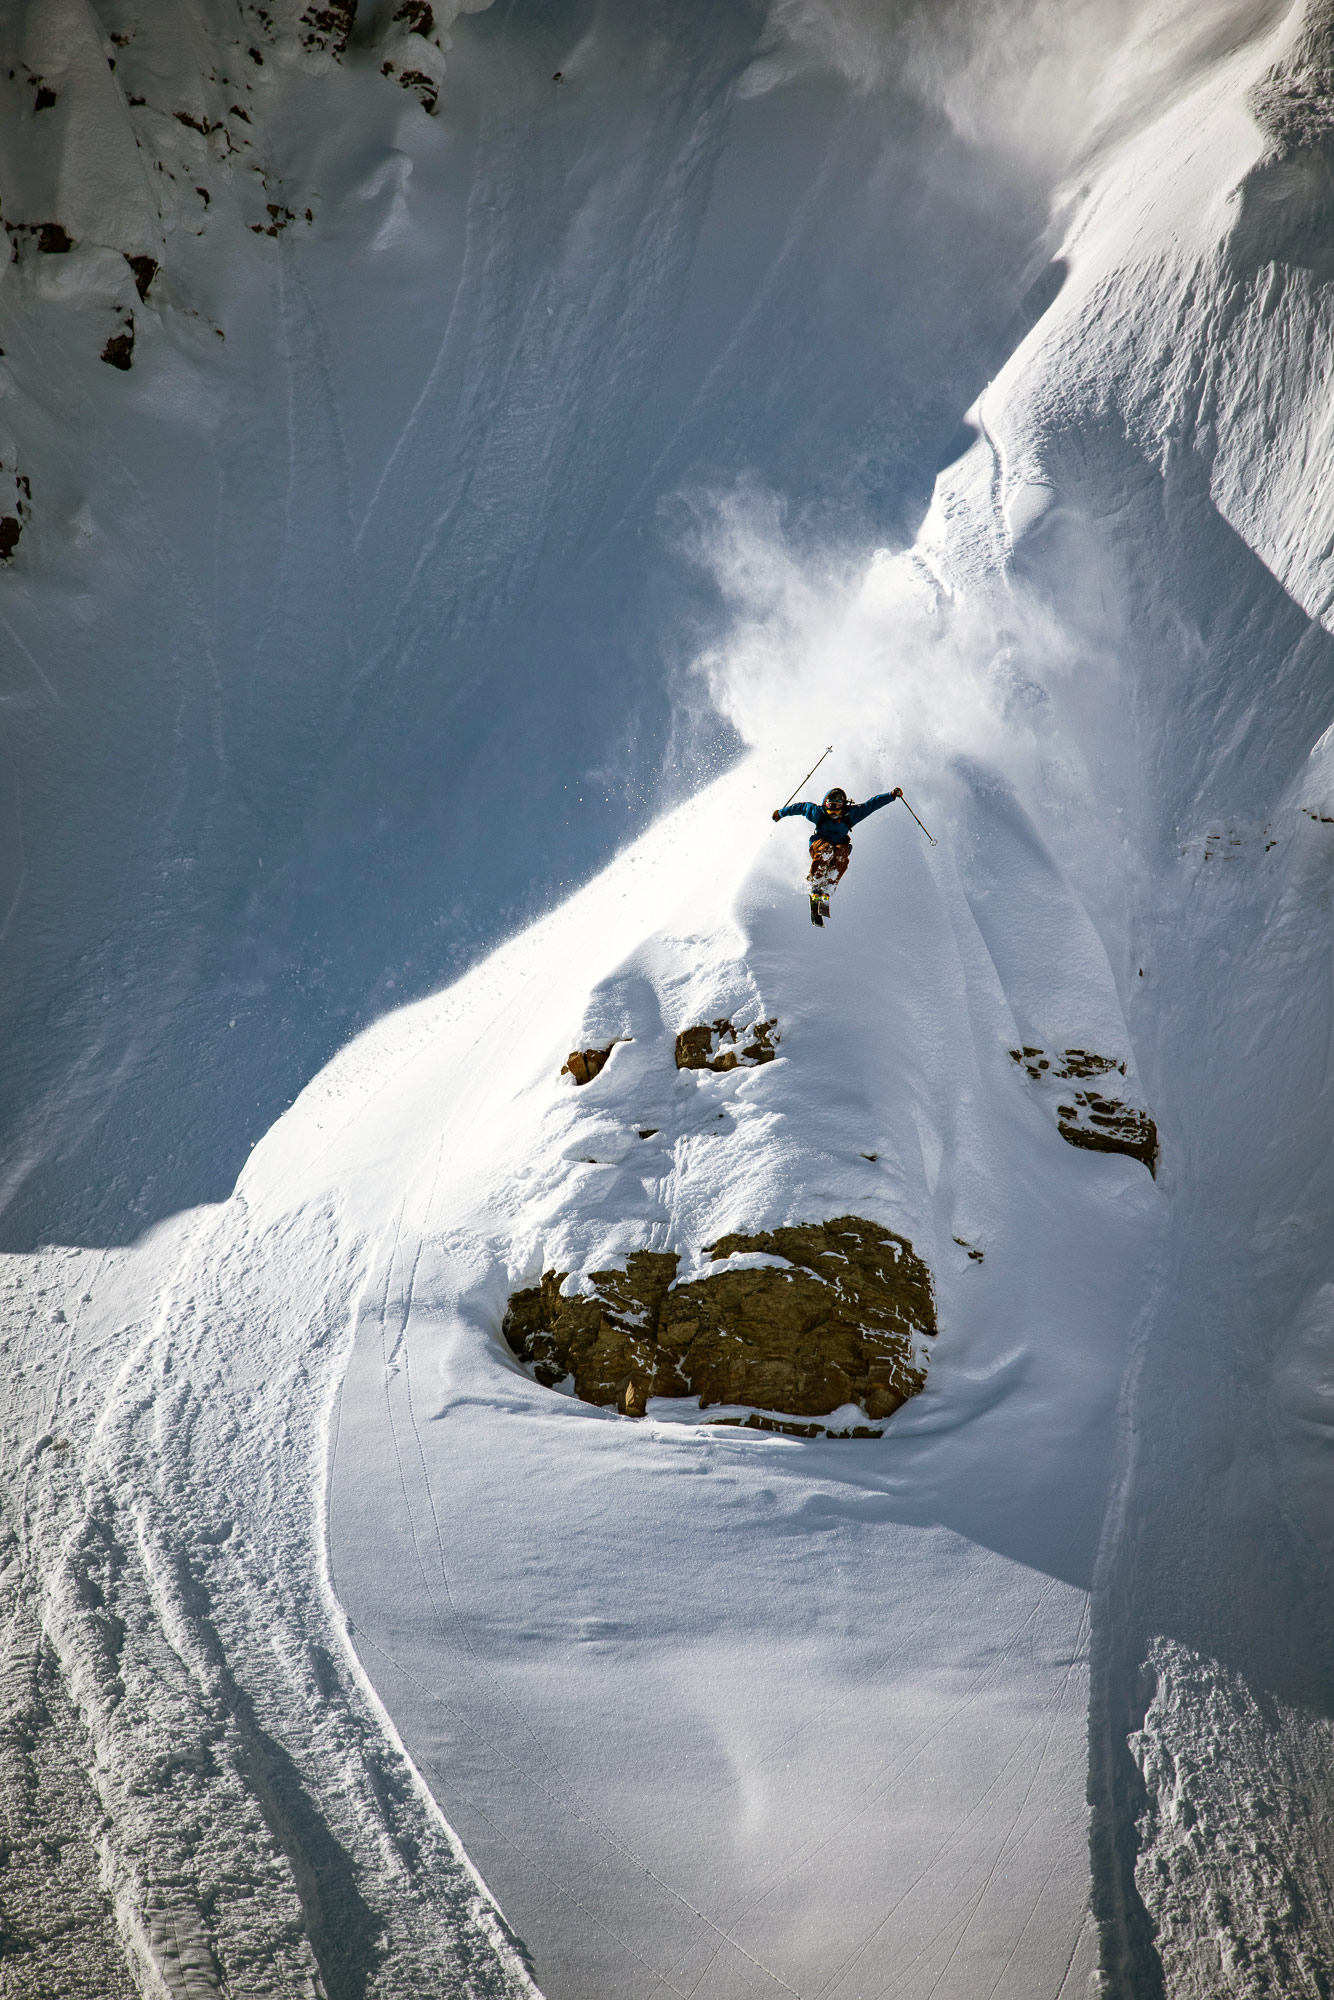 Duncan Adams skiing in the Wyoming backcountry for the Faction Skis team movie ROOTS.